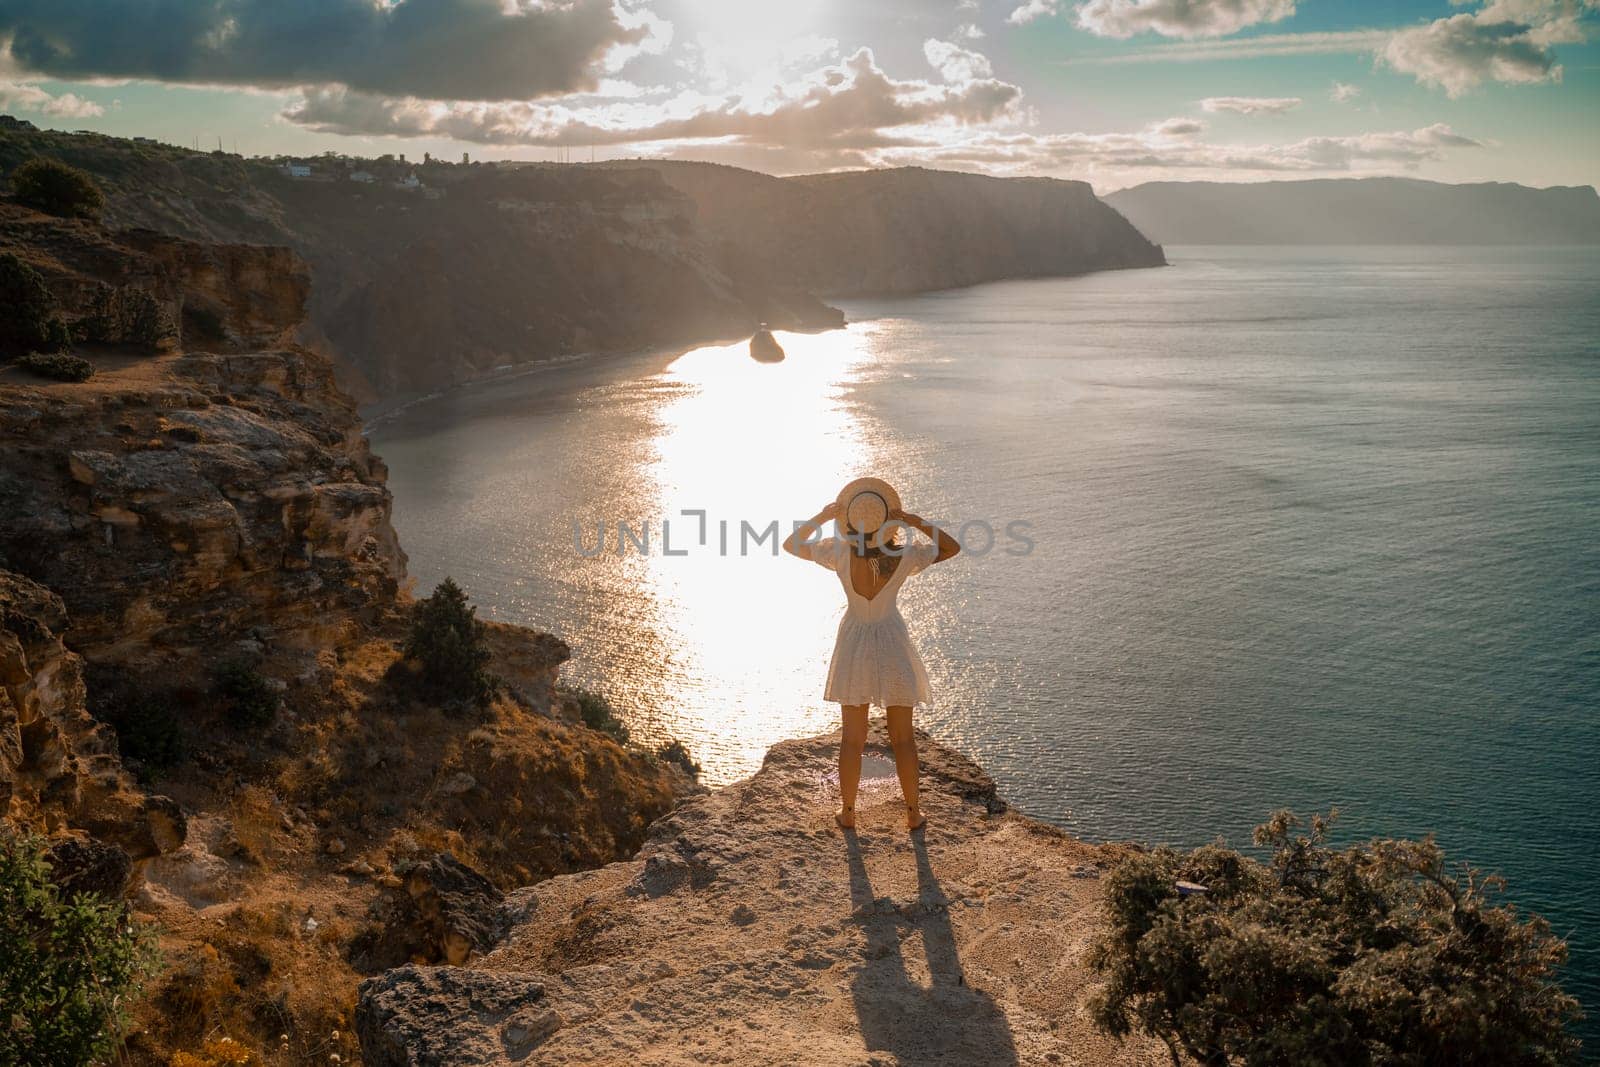 A woman stands on a cliff overlooking the ocean. She is wearing a white dress and a straw hat. The sky is cloudy and the sun is setting